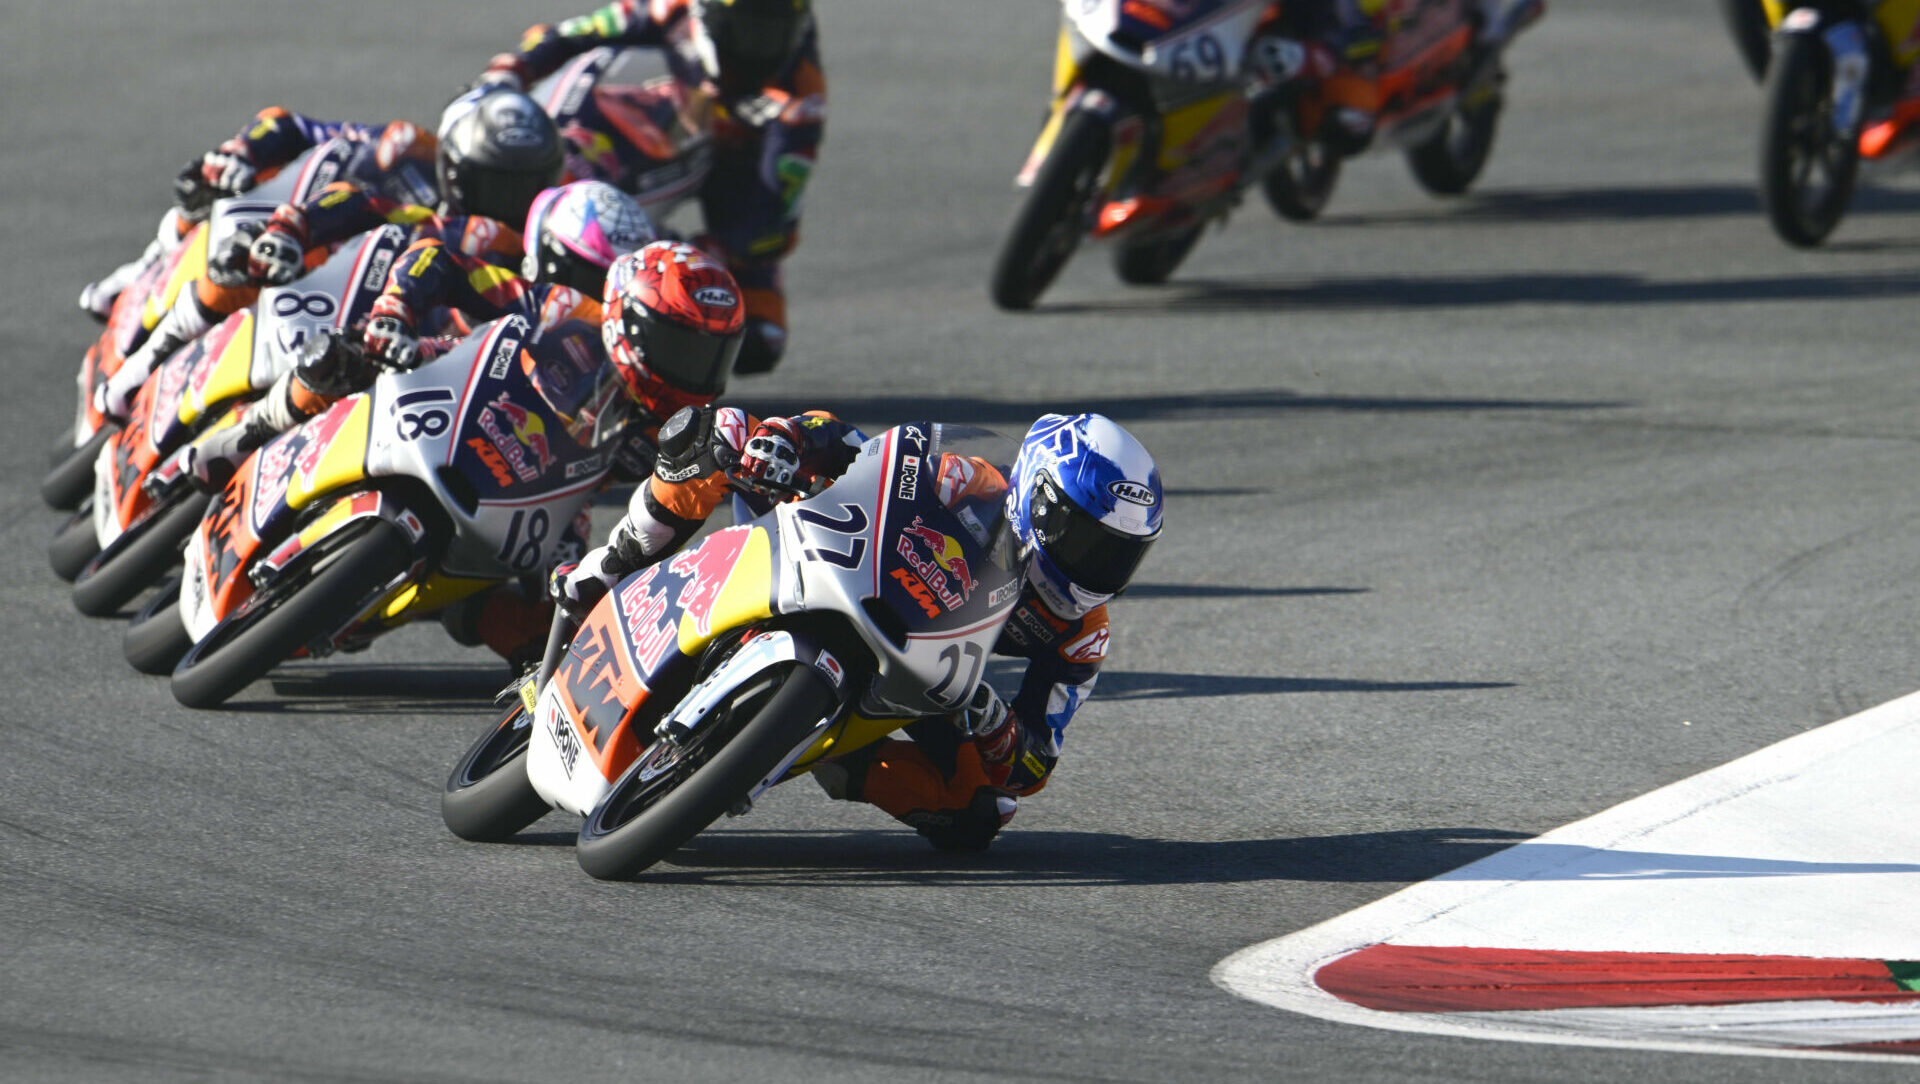 Rico Salmela (27) leads Angel Piqueras (18) and the rest of the field during Red Bull MotoGP Rookies Cup Race Two in Austria. Photo courtesy Red Bull.